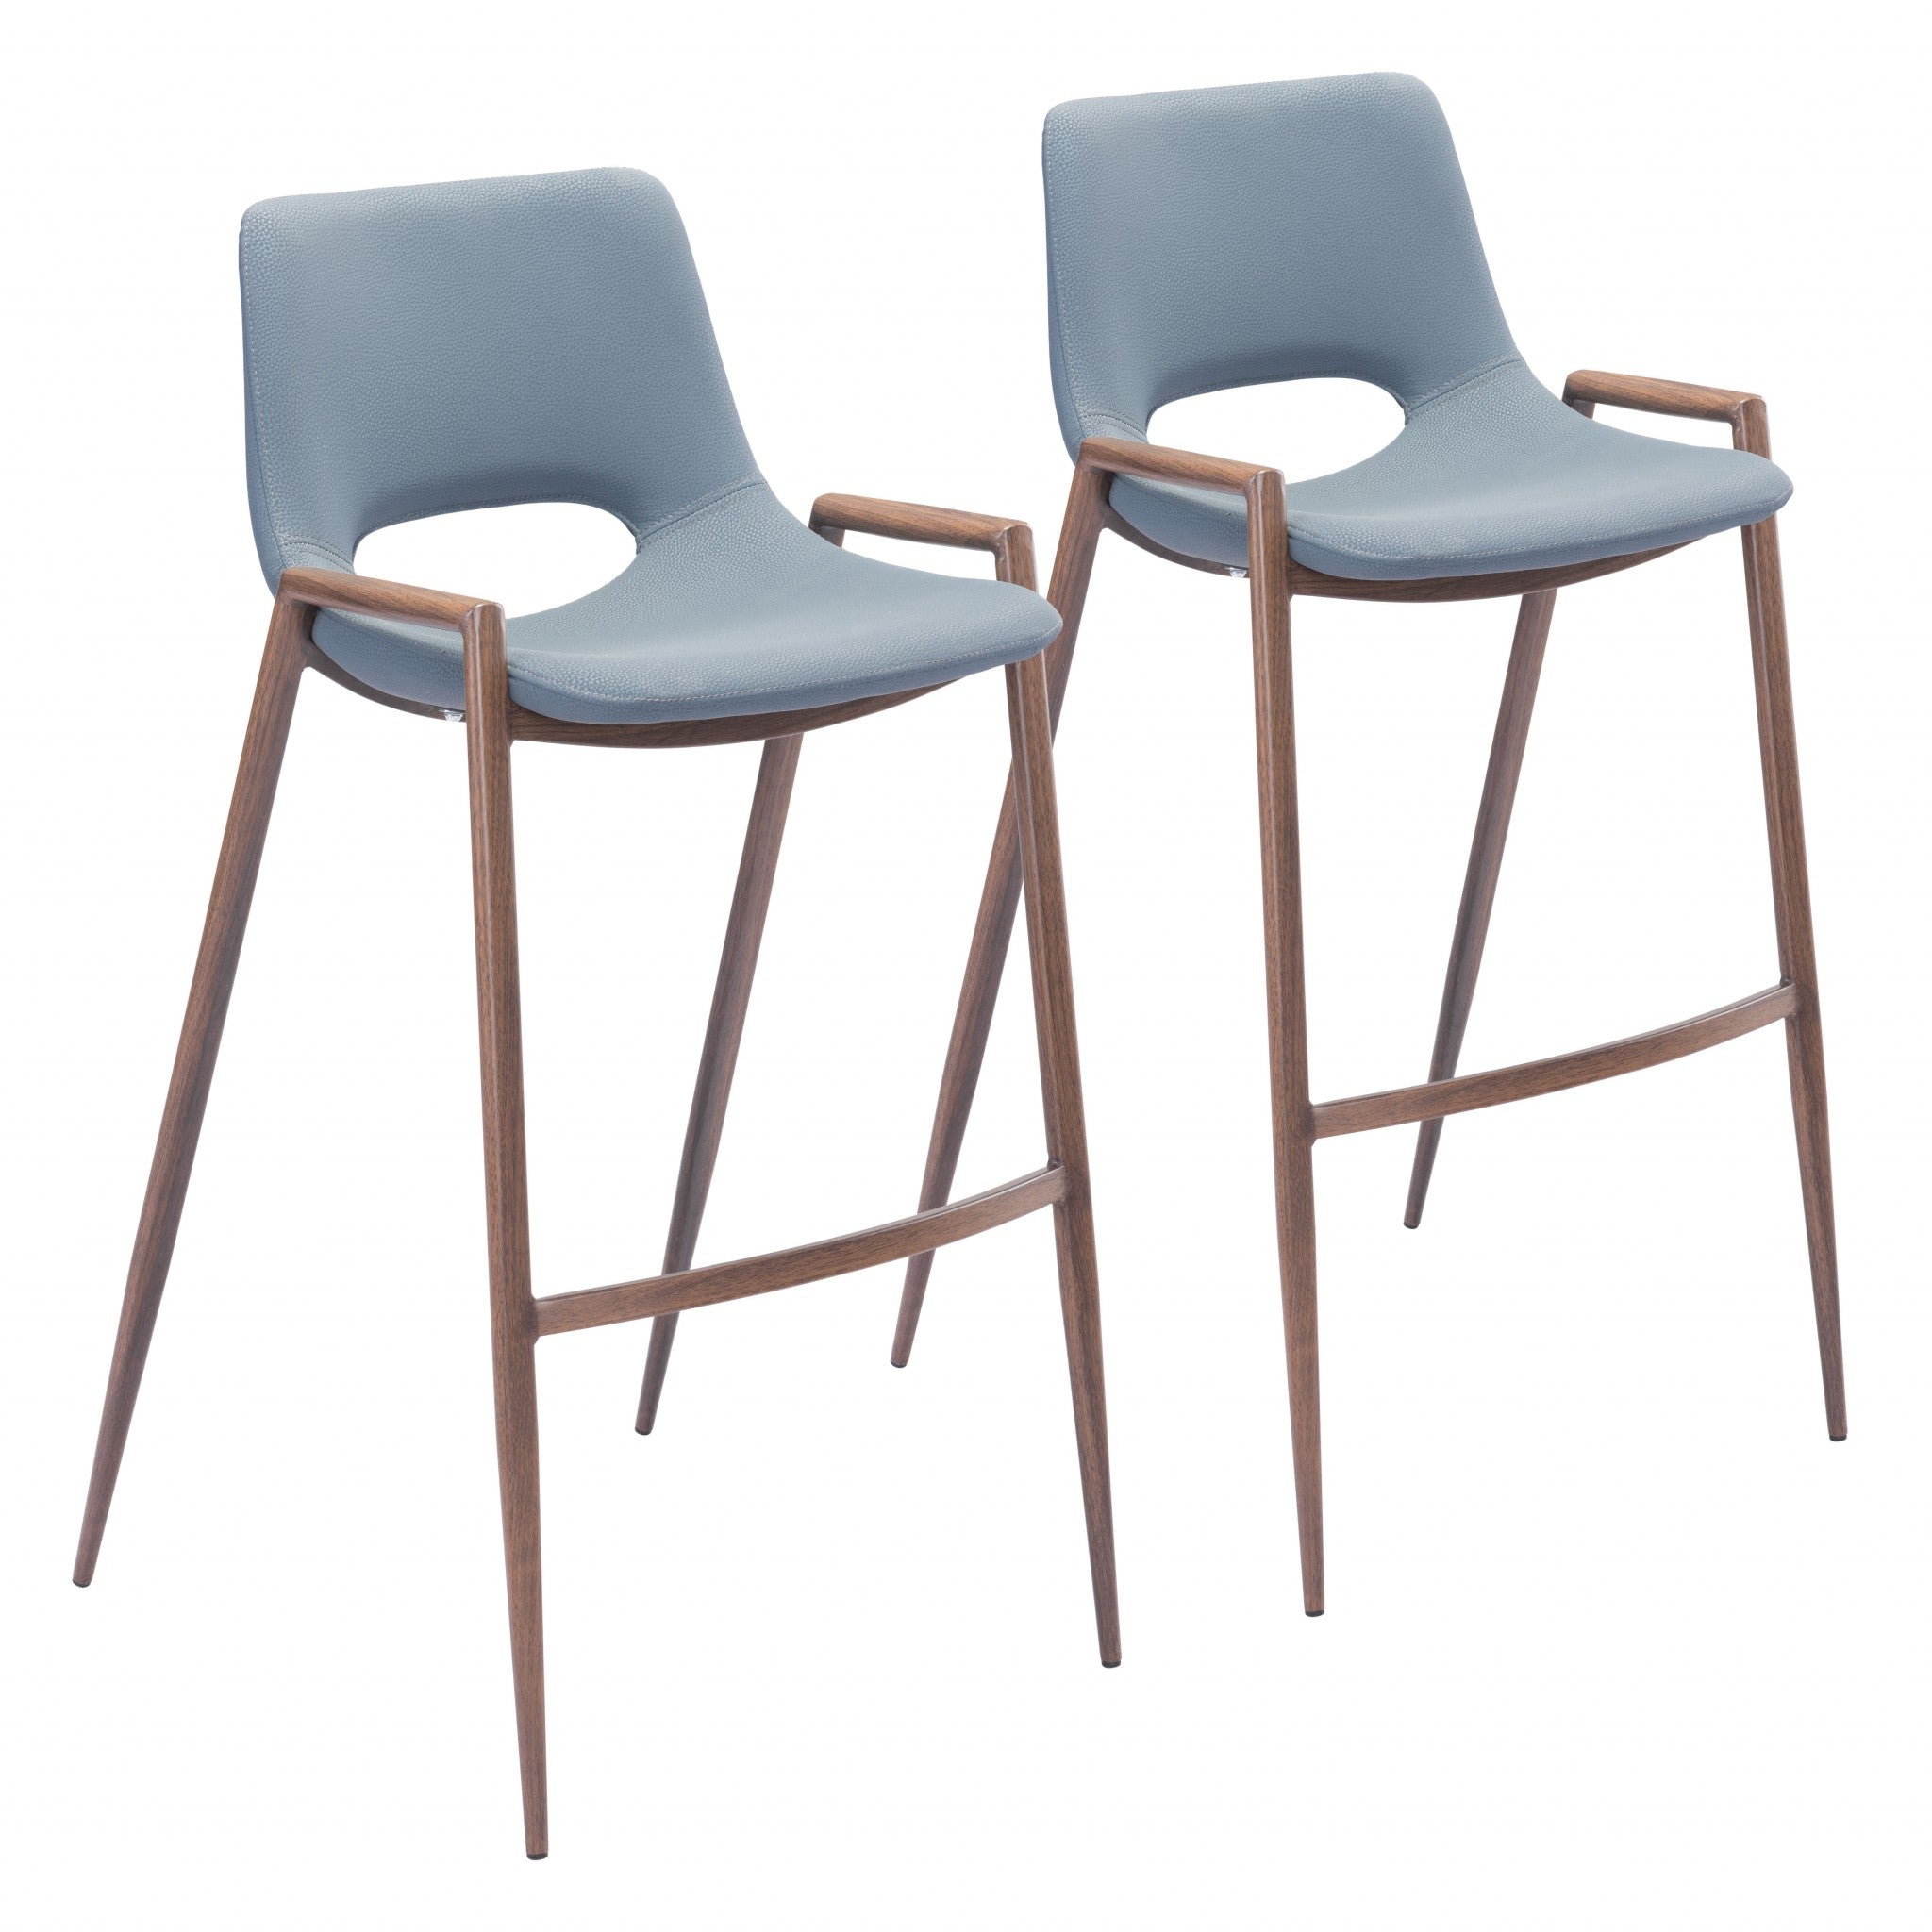 Set of Two 29" Gray And Brown Steel Low Back Bar Height Bar Chairs